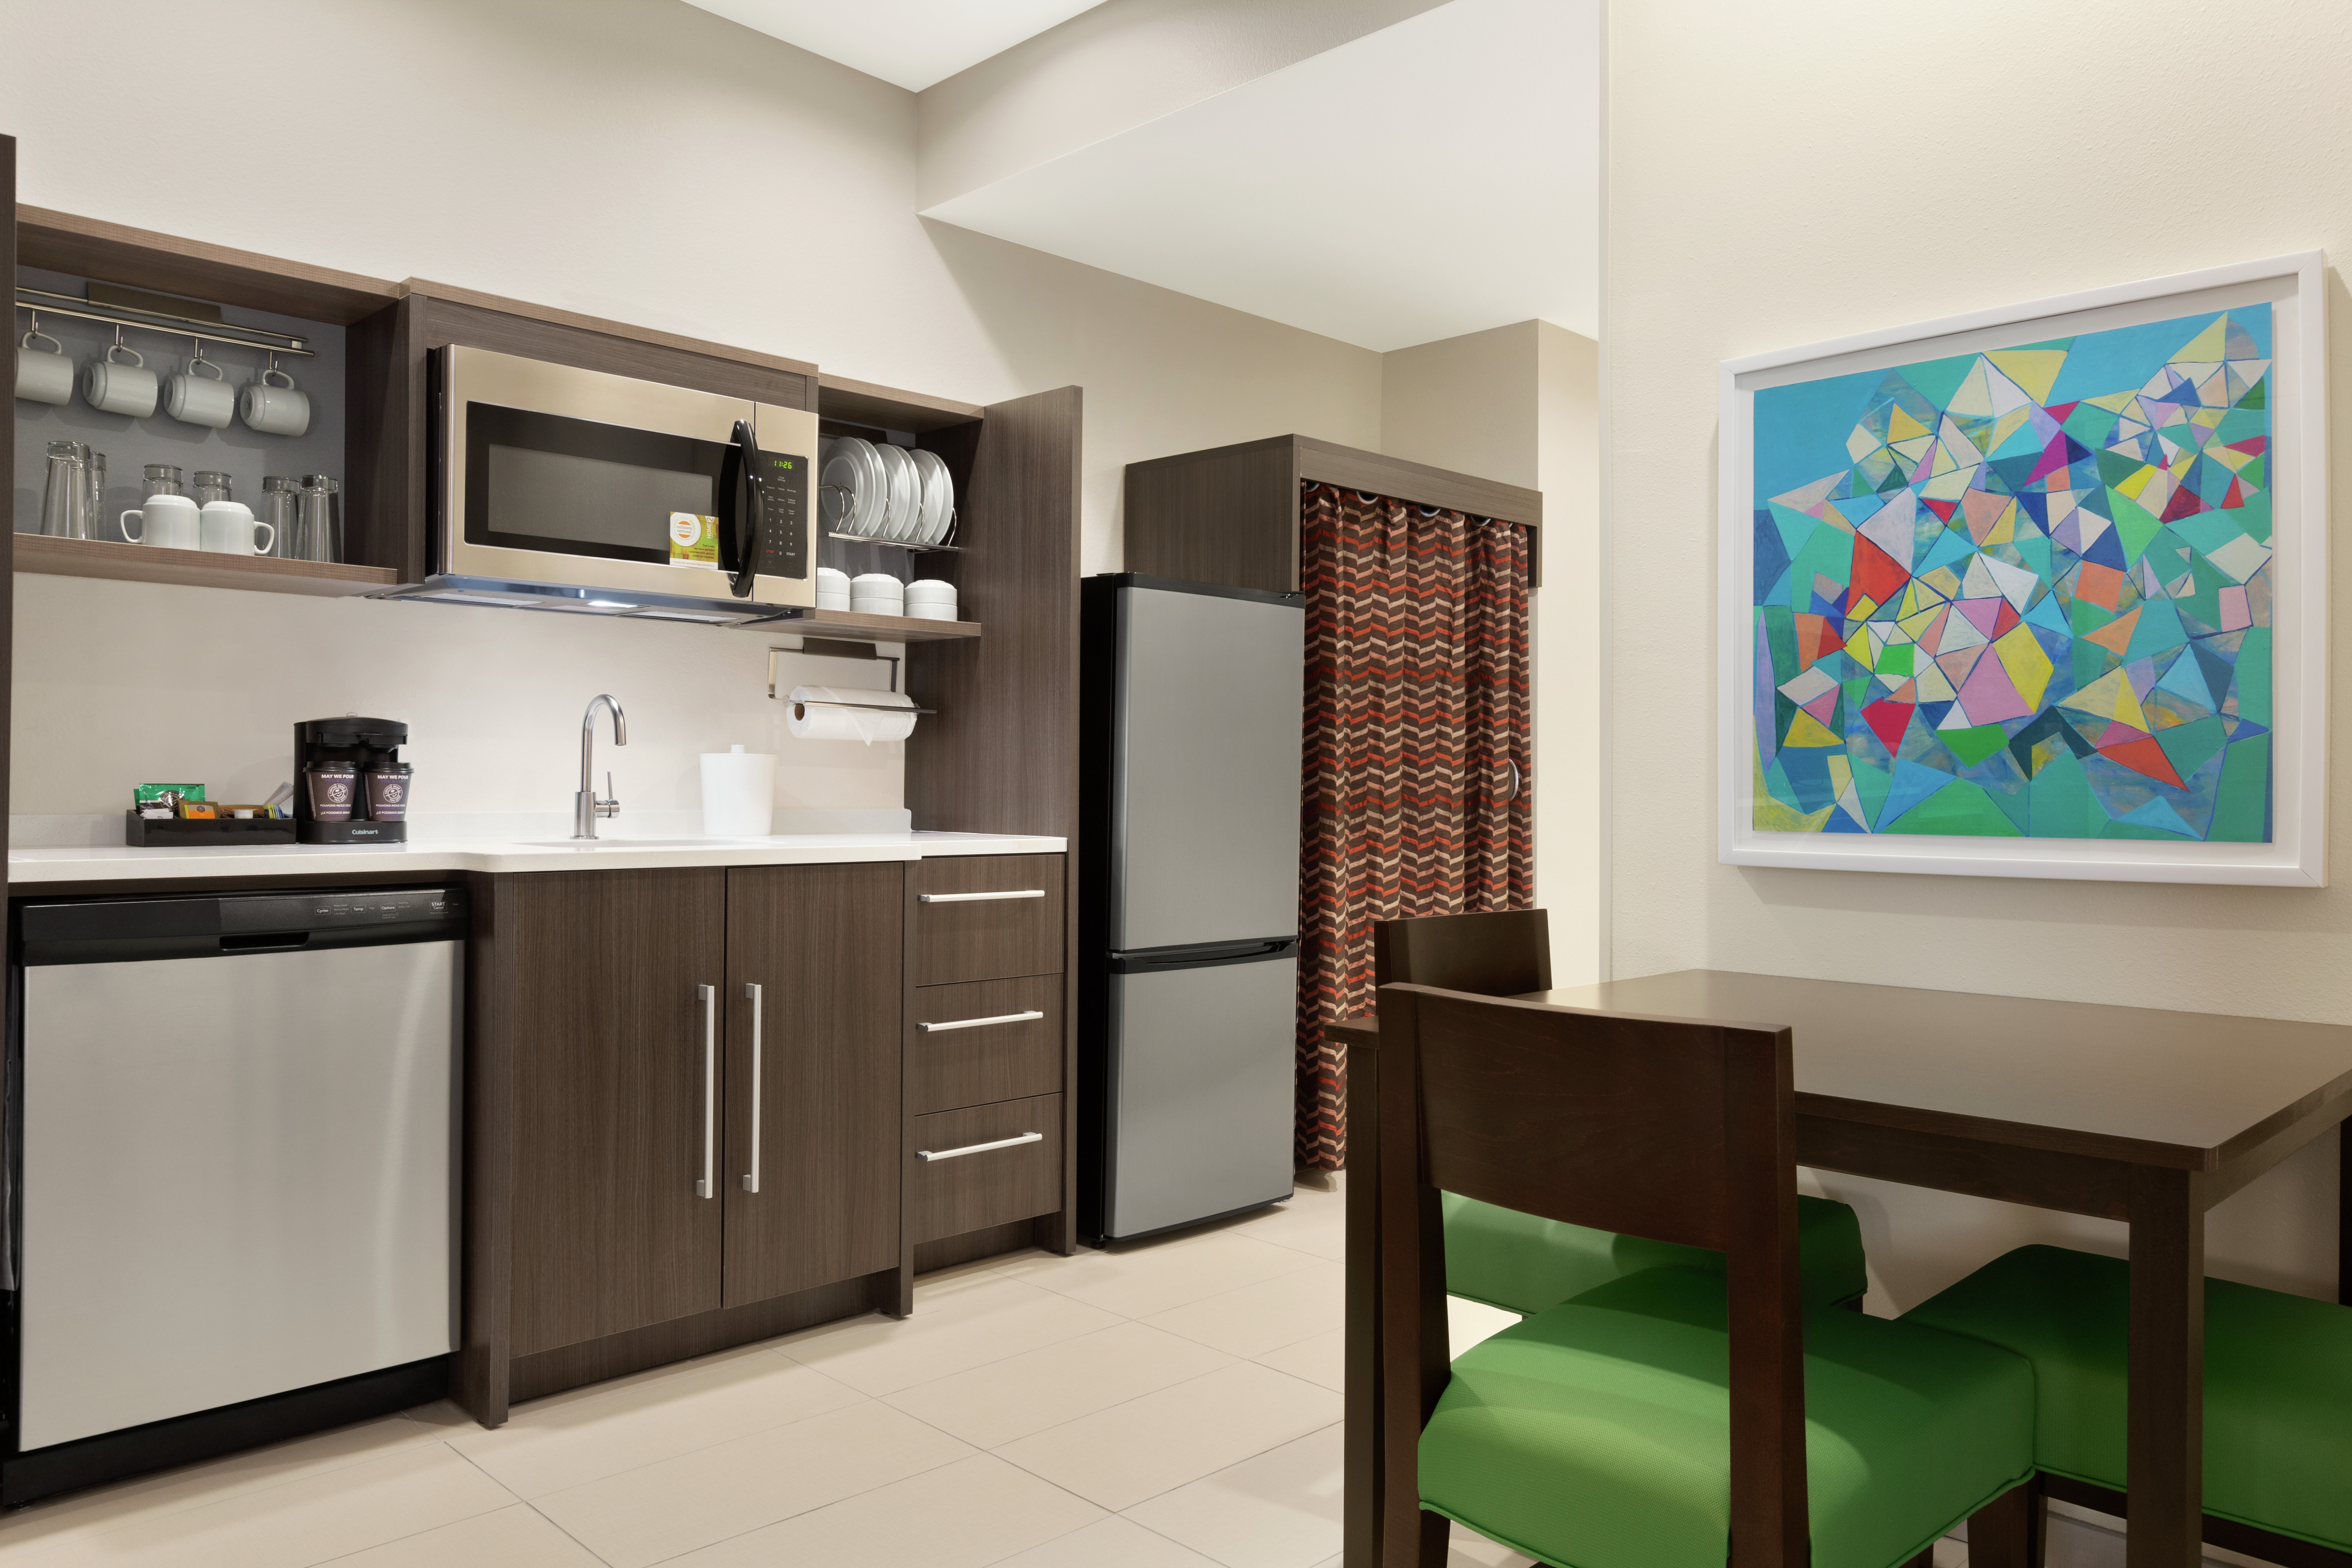 Spacious suite featuring dining table, abstract framed art on wall, and fully equipped kitchen.